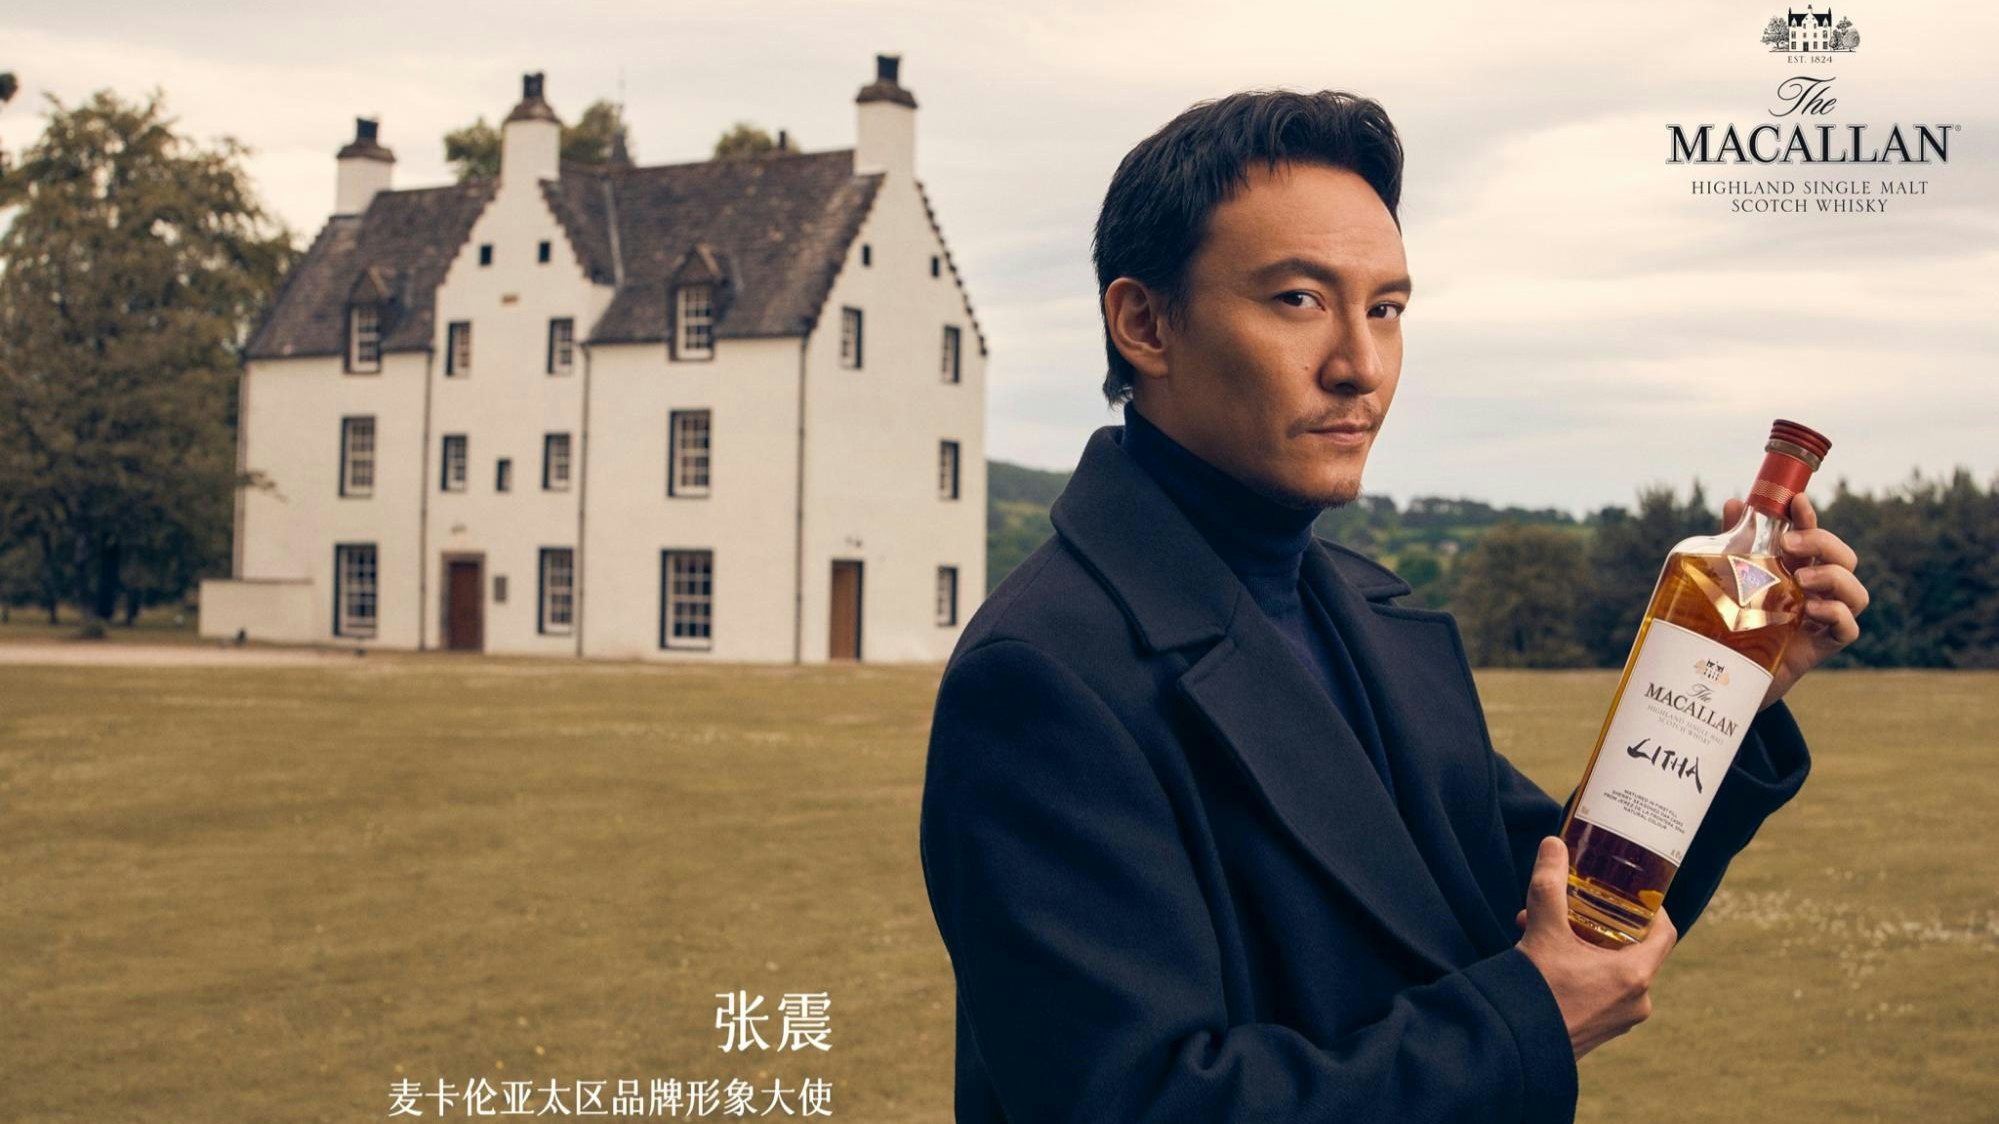 Internationally renowned actor Chang Chen becomes the first The Macallan Ambassador for Asia Pacific. Photo: The Macallan 